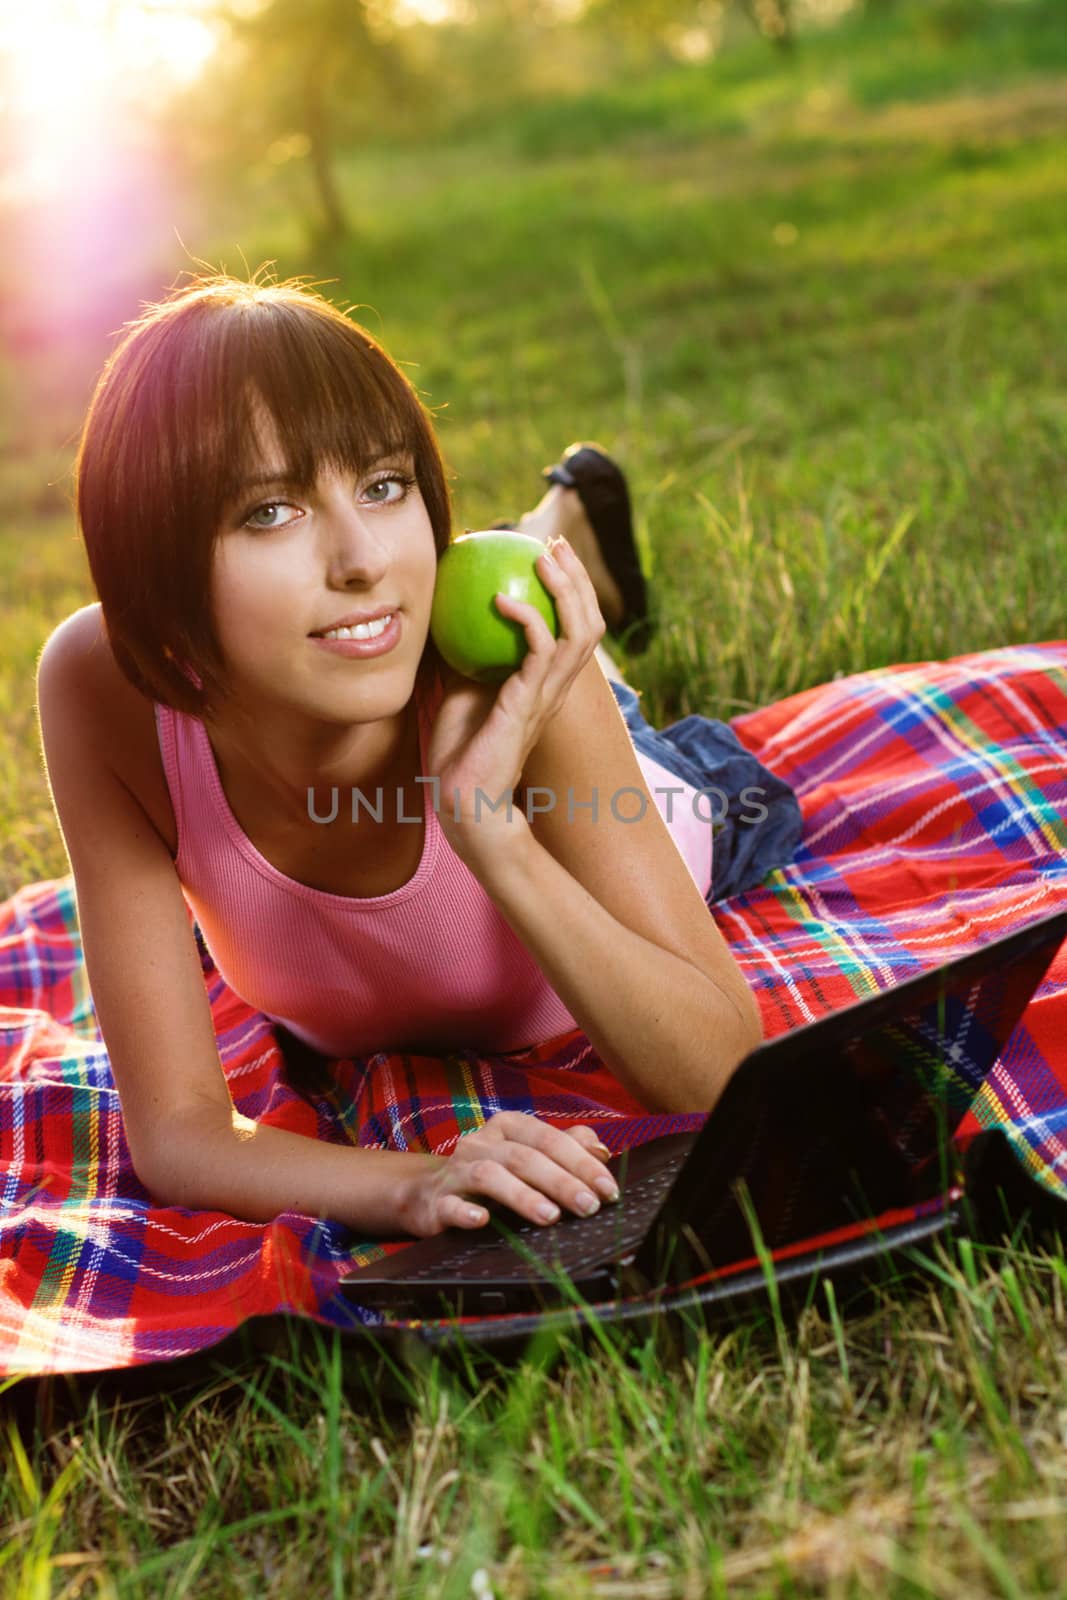 Lovely girl having a rest with laptop in the park 